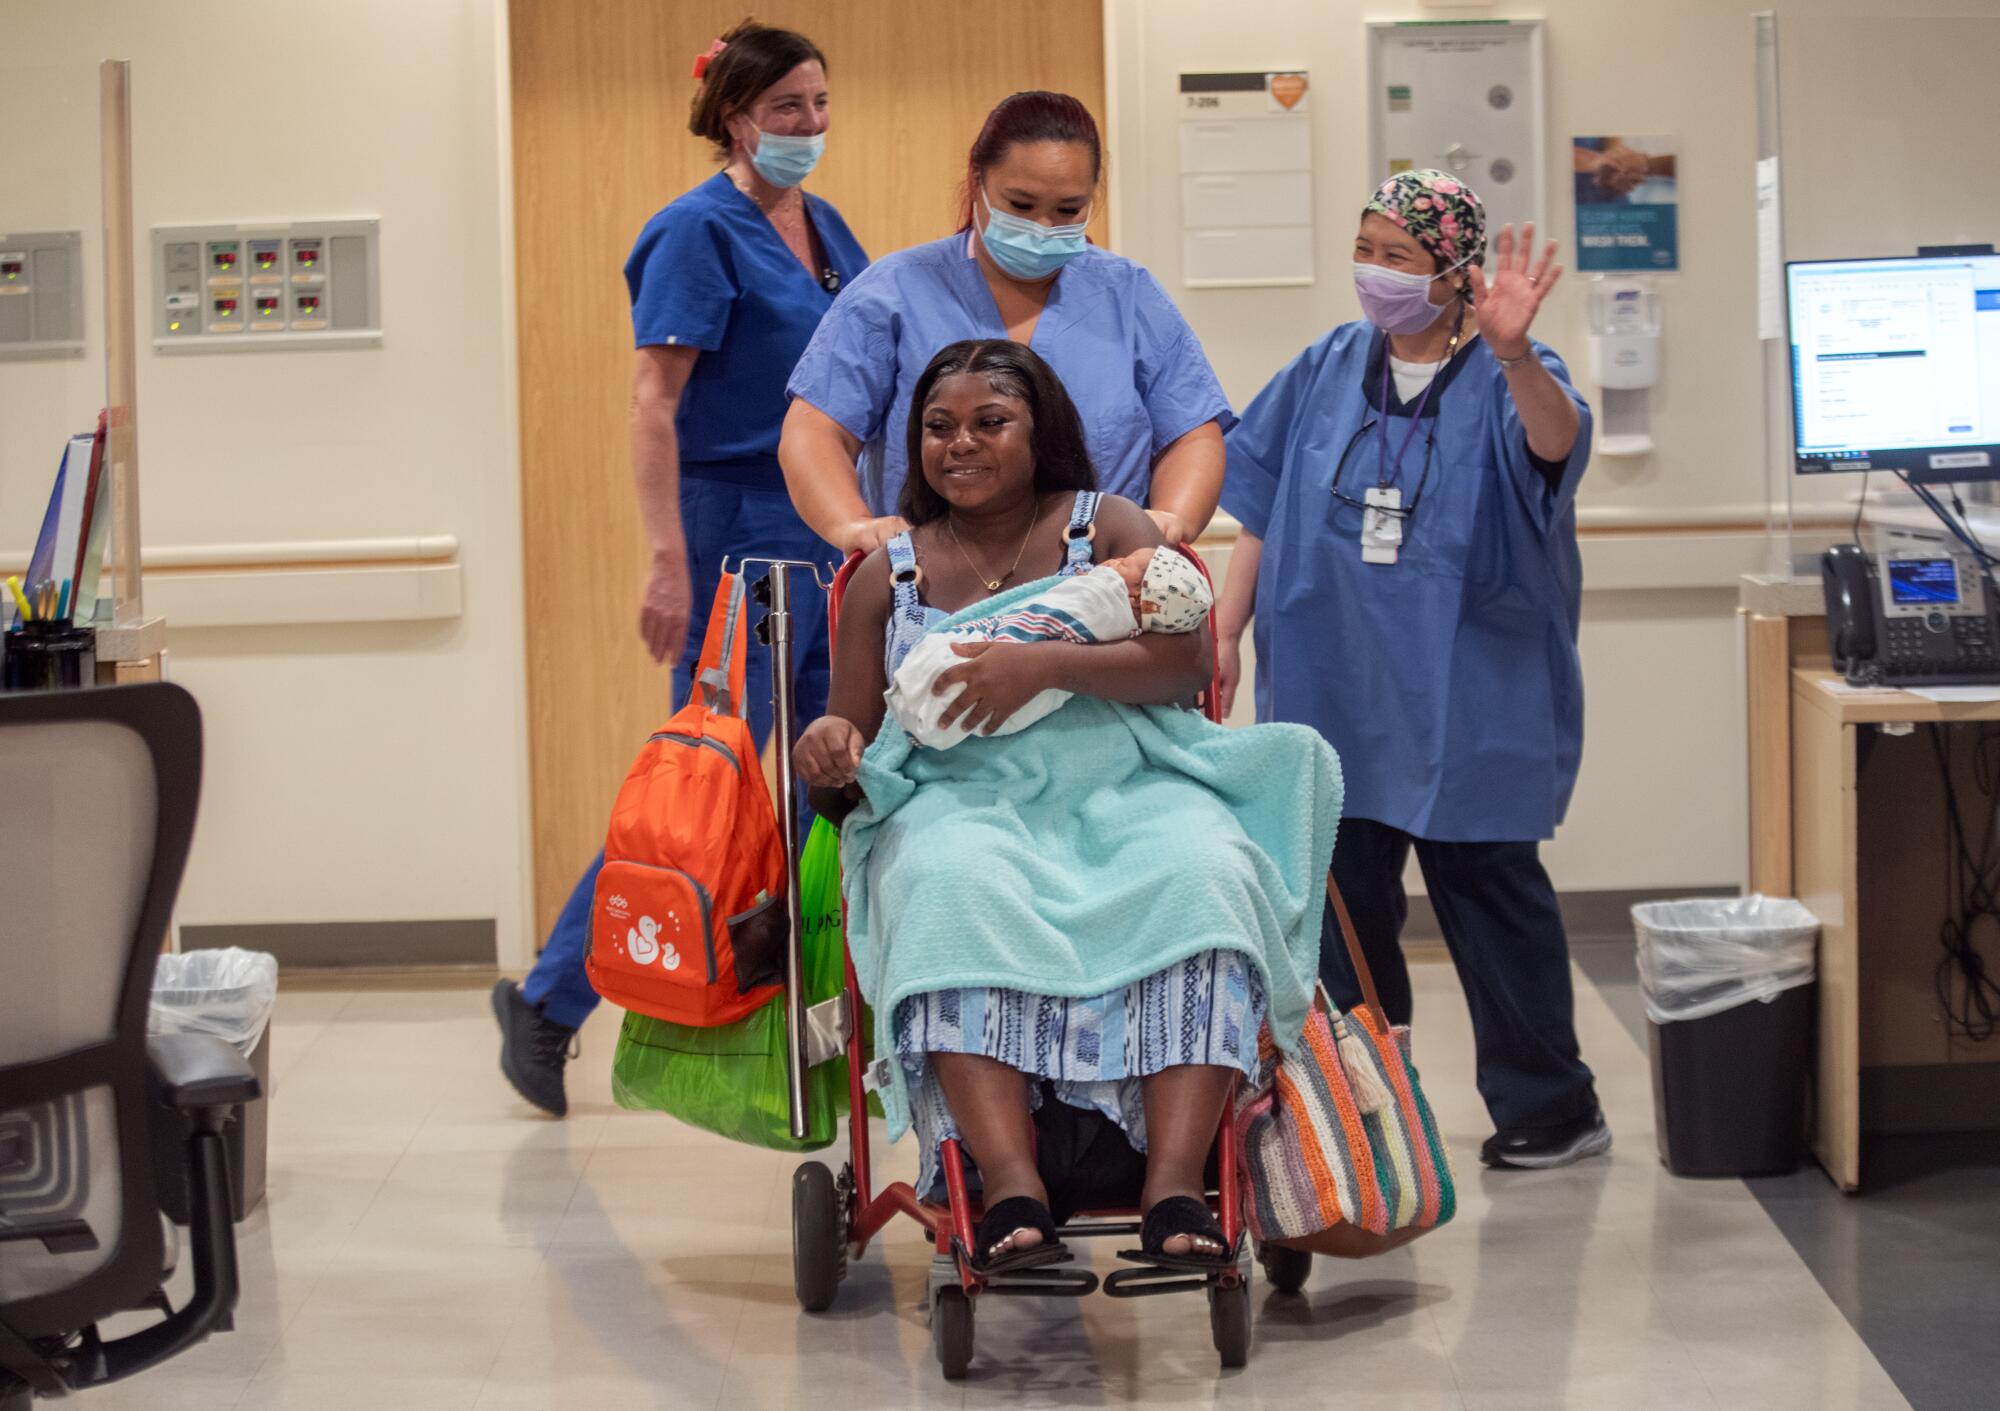 A woman holding her baby is wheeled through a hospital in a wheelchair.